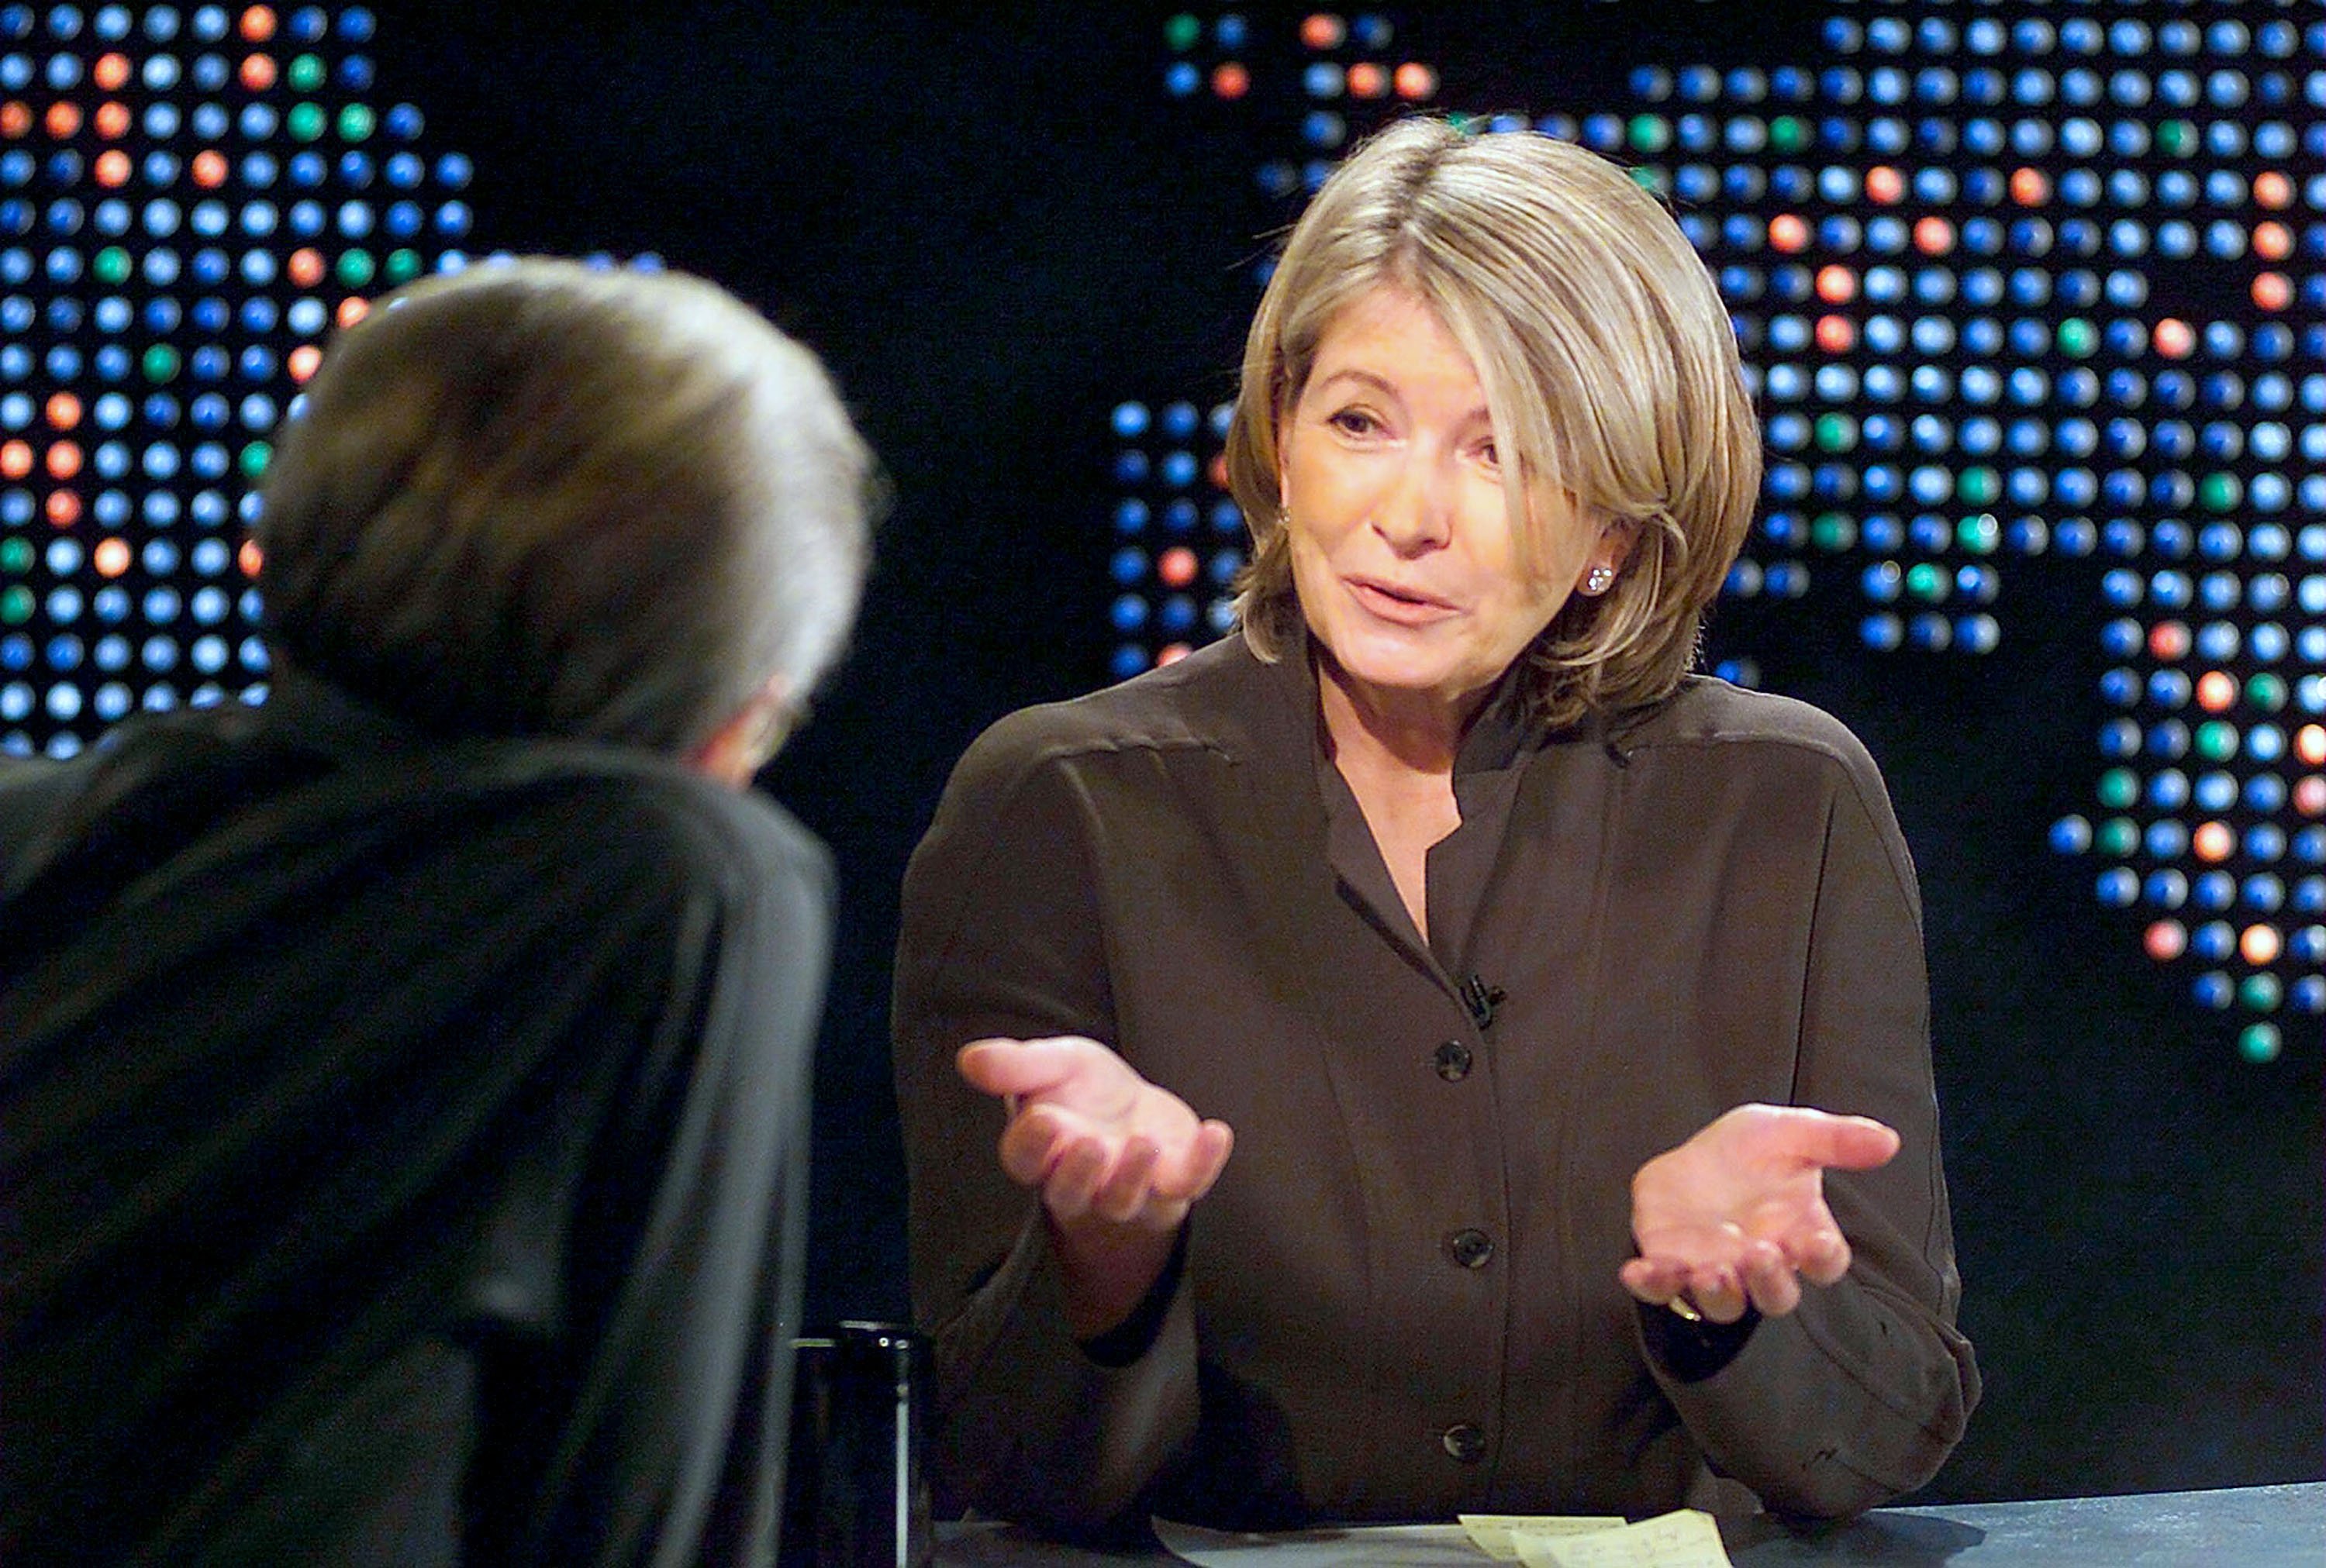 CNN's Larry King interviews Martha Stewart during a taping of Larry King Live on Saturday, December 20, 2003. | Source: Getty Images